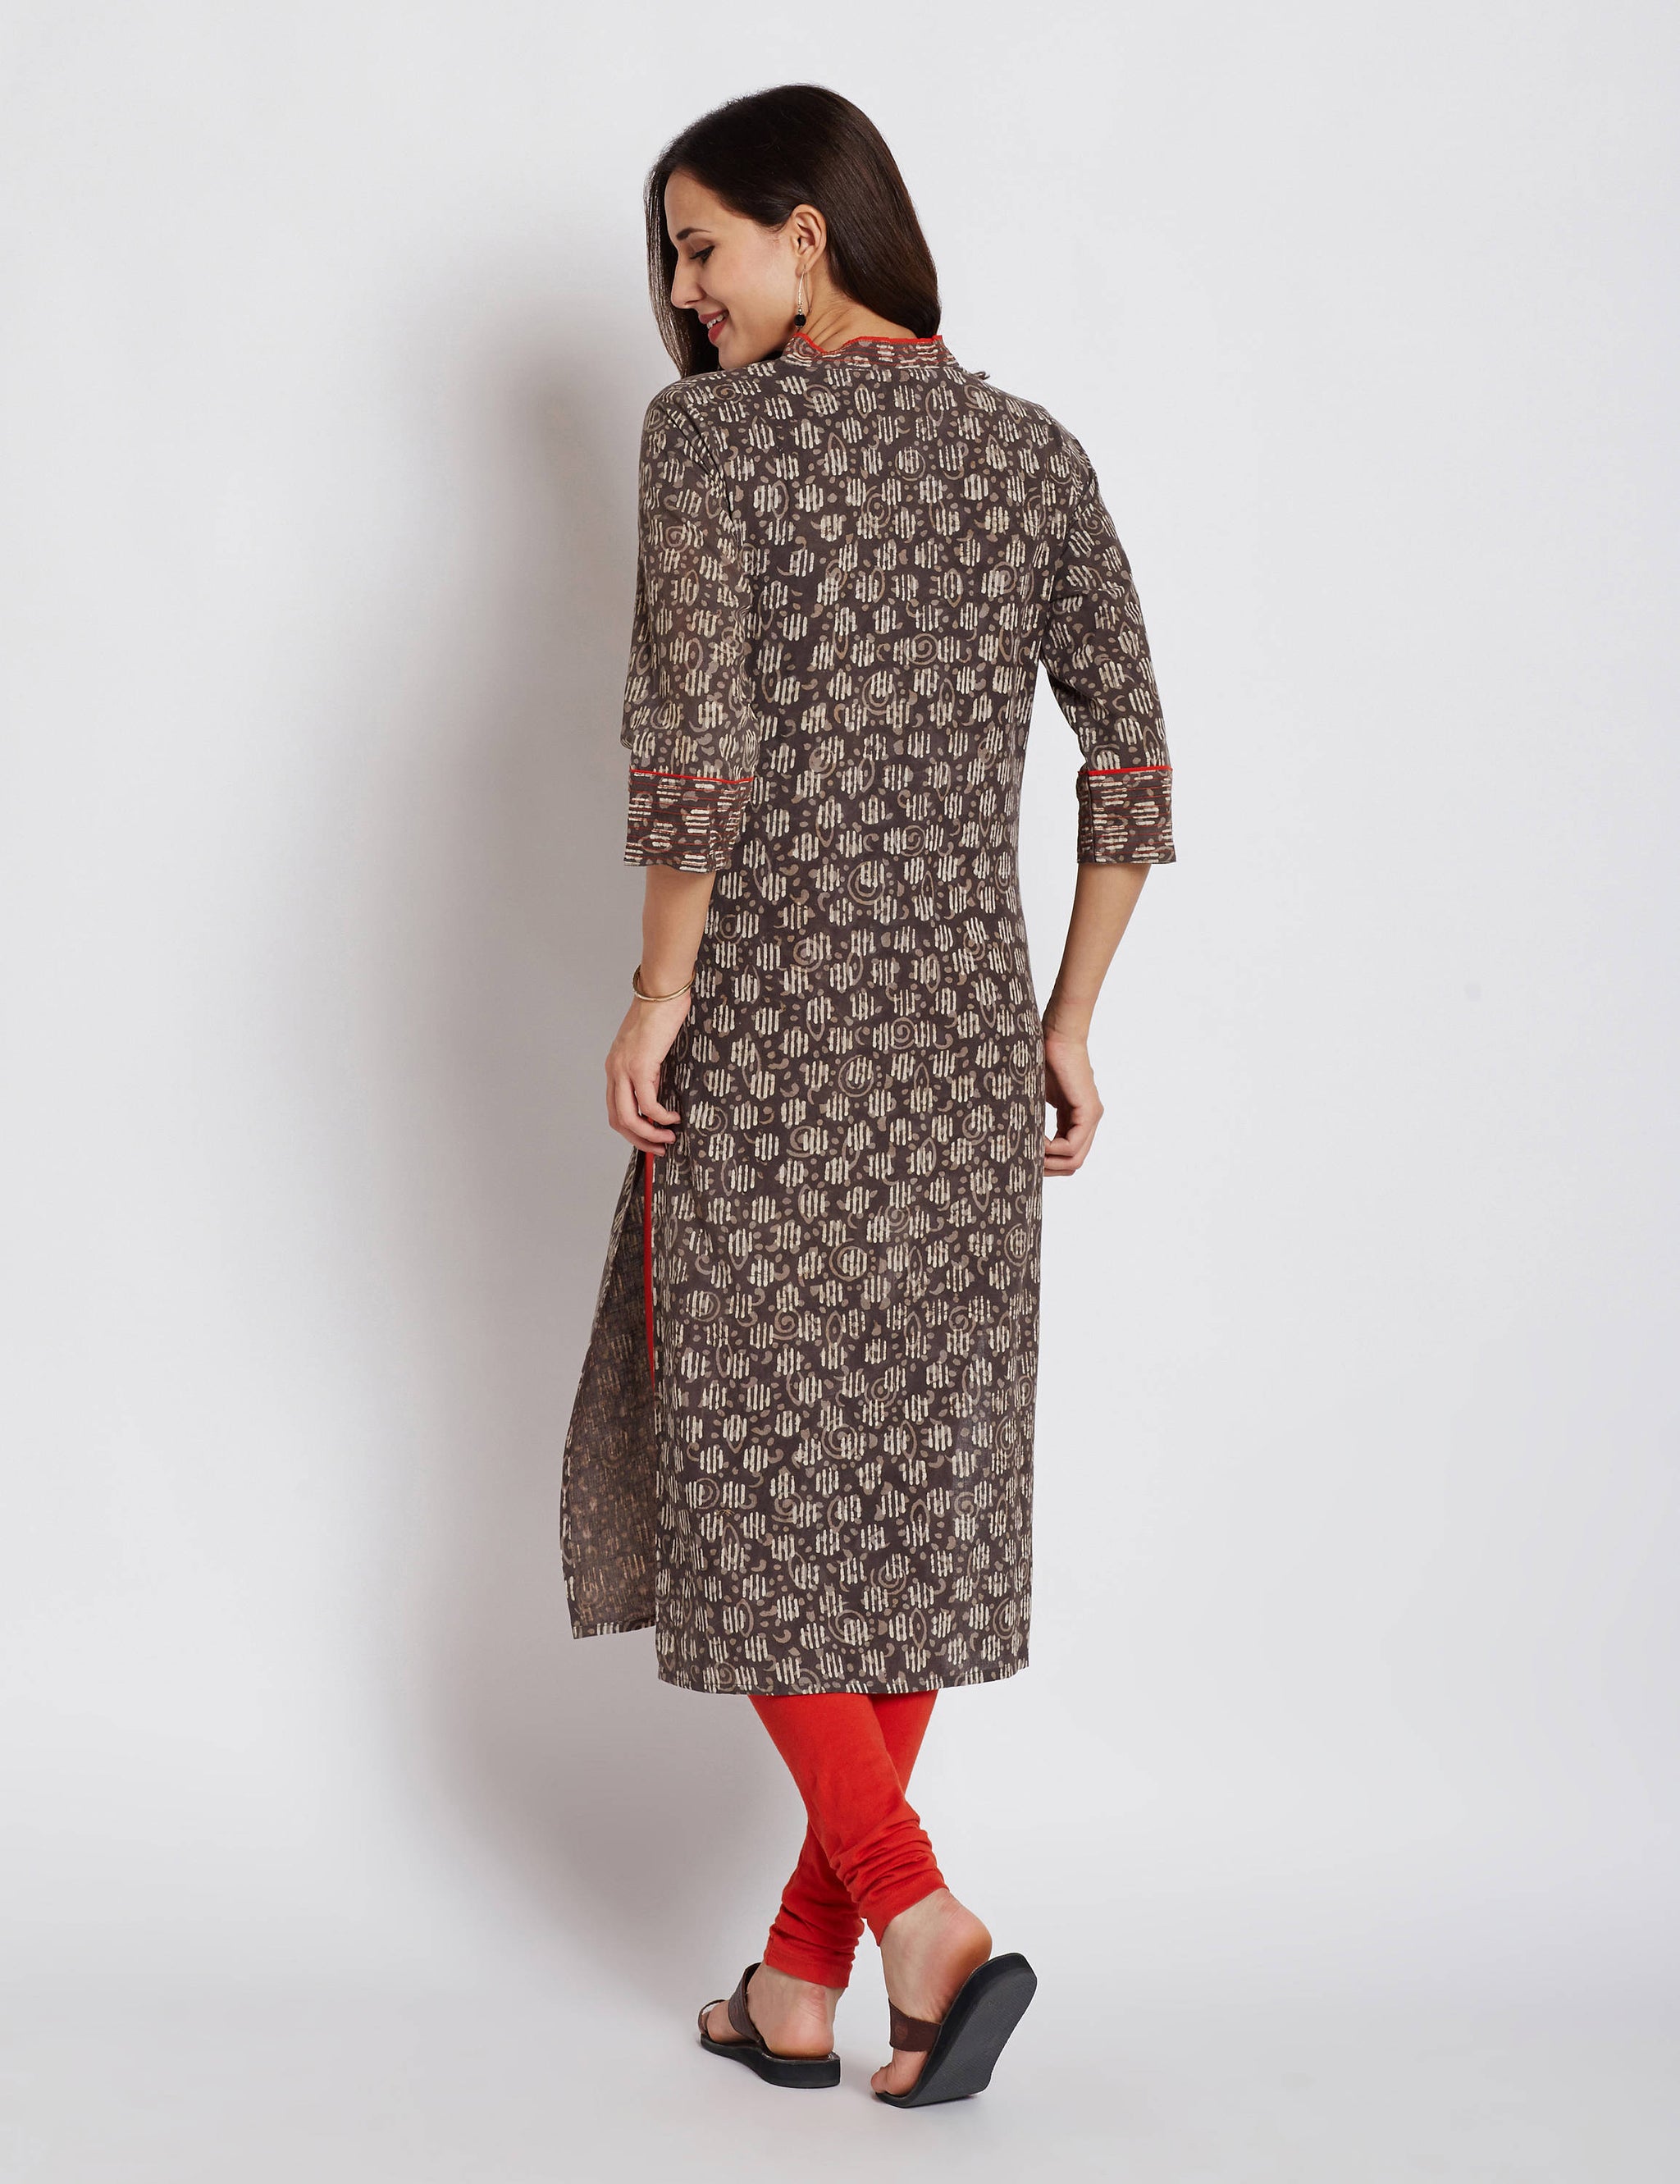 Hand block dabu printed ethnic long Indian kurta with contrast trims and orange hand embroidery on V neck and sleeves